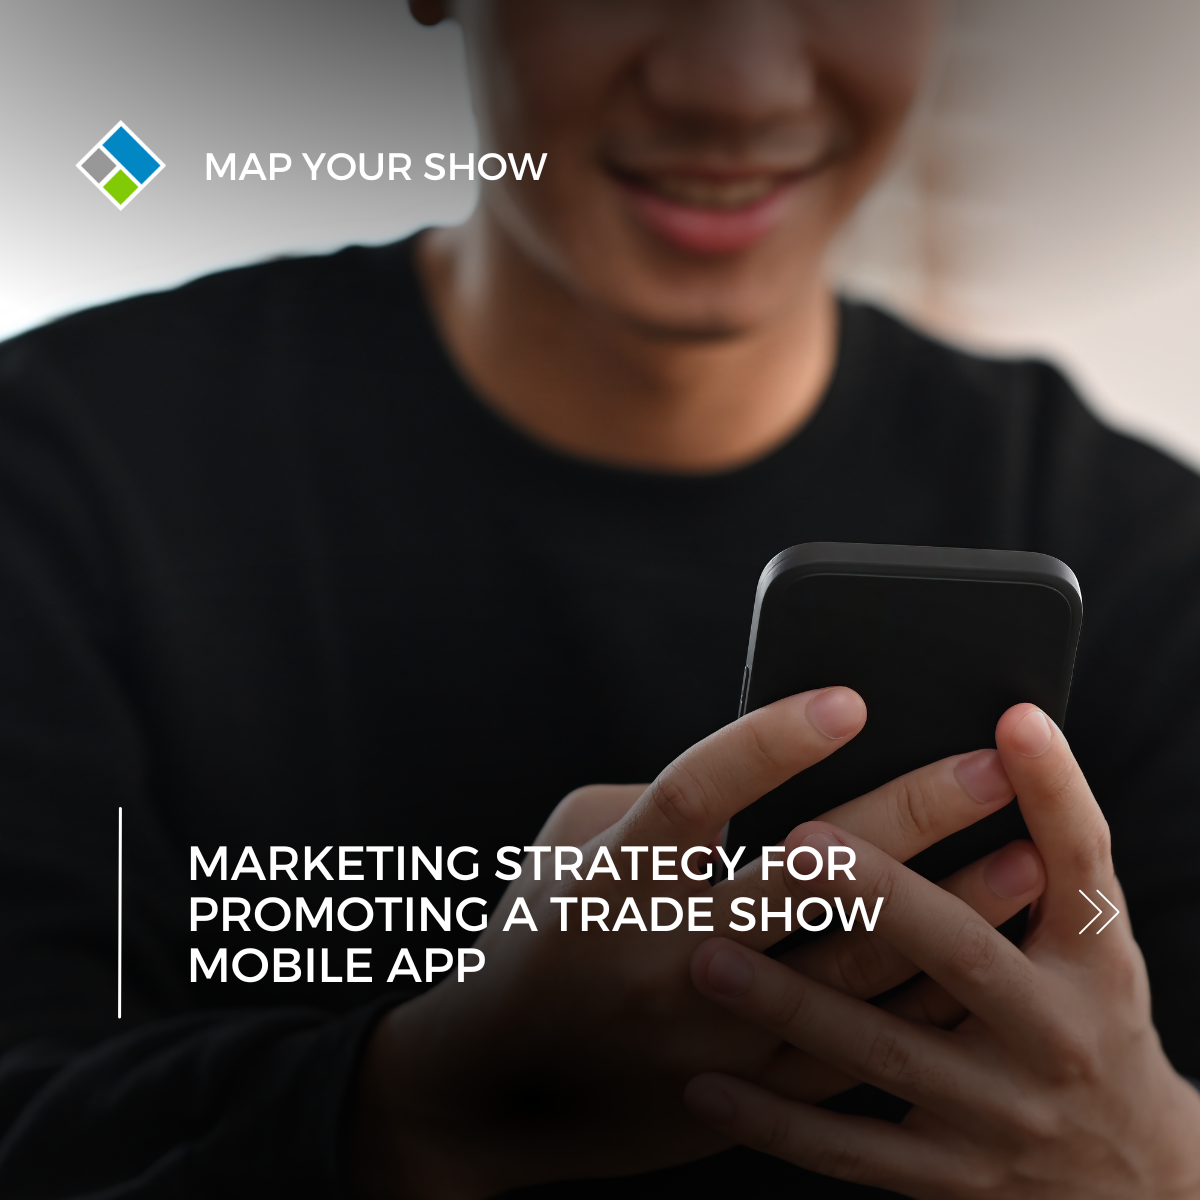 Marketing Strategy for Promoting a Trade Show Mobile App. Map Your Show Event Management Technology- including Event Mobile App